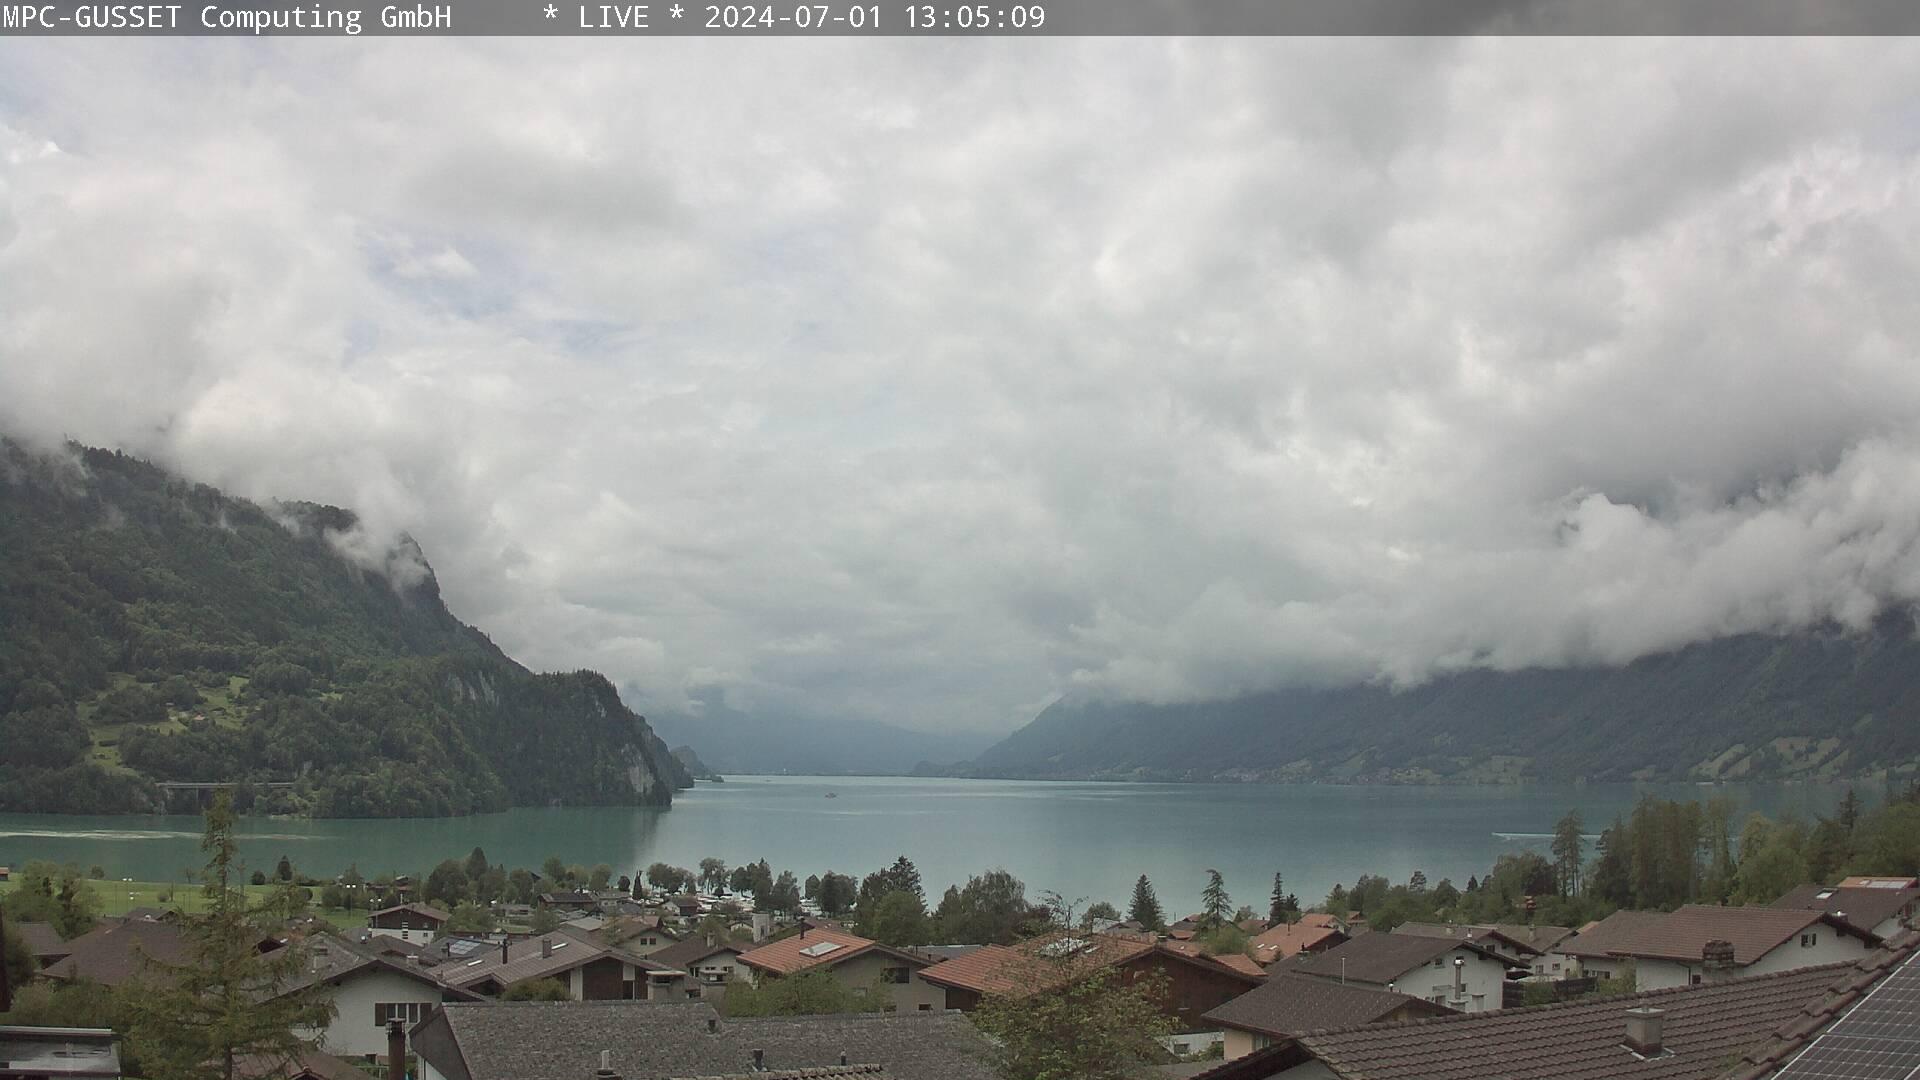 Windy: Webcams - Brienz › South-West: MPC-Gusset computing GmbH